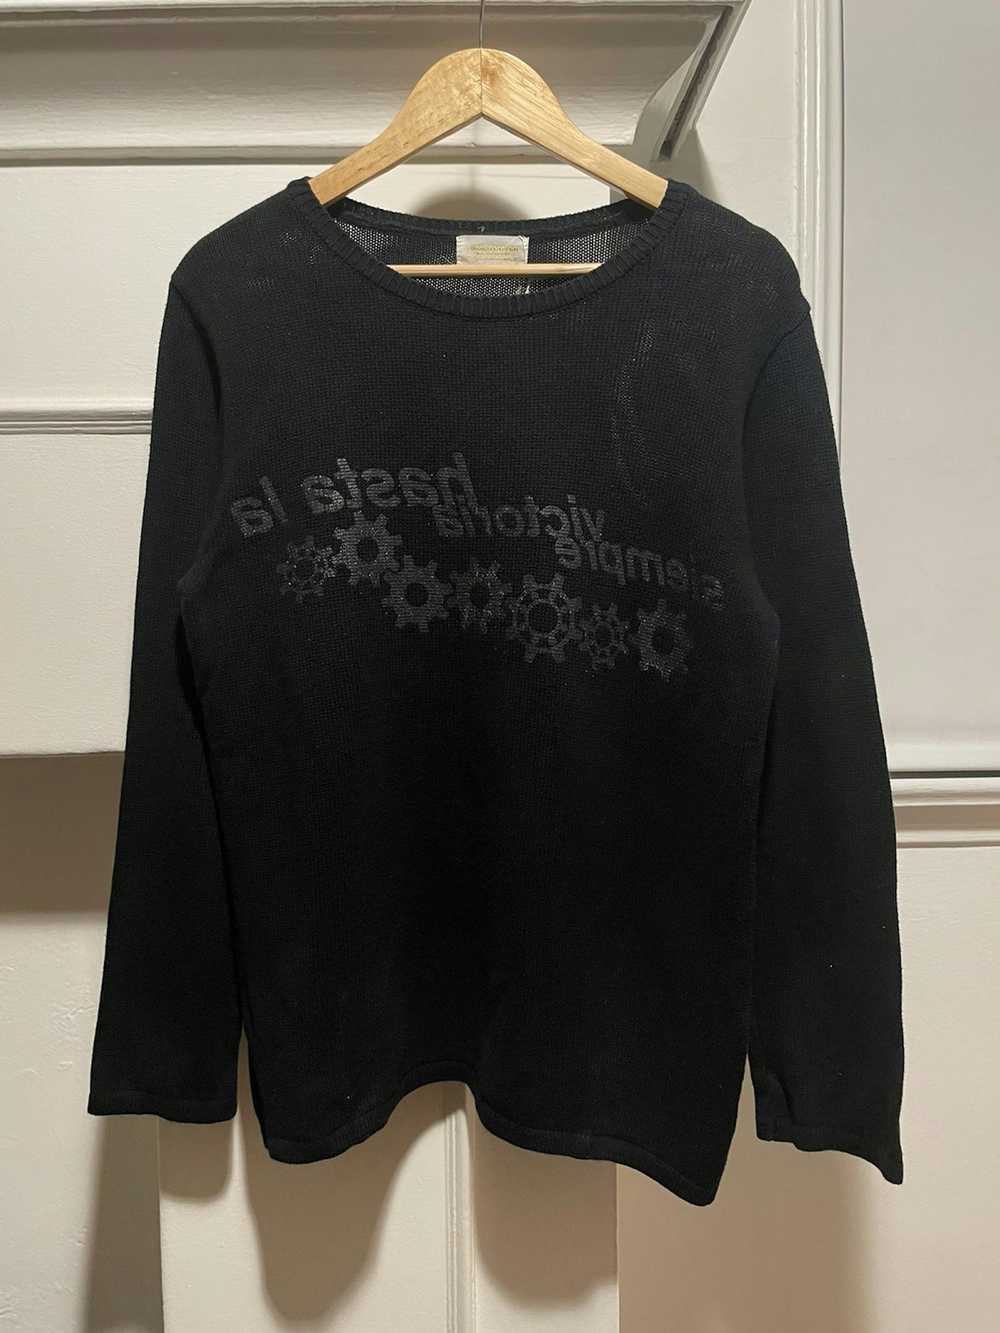 Undercover SS1998 Gear Sweater - image 1